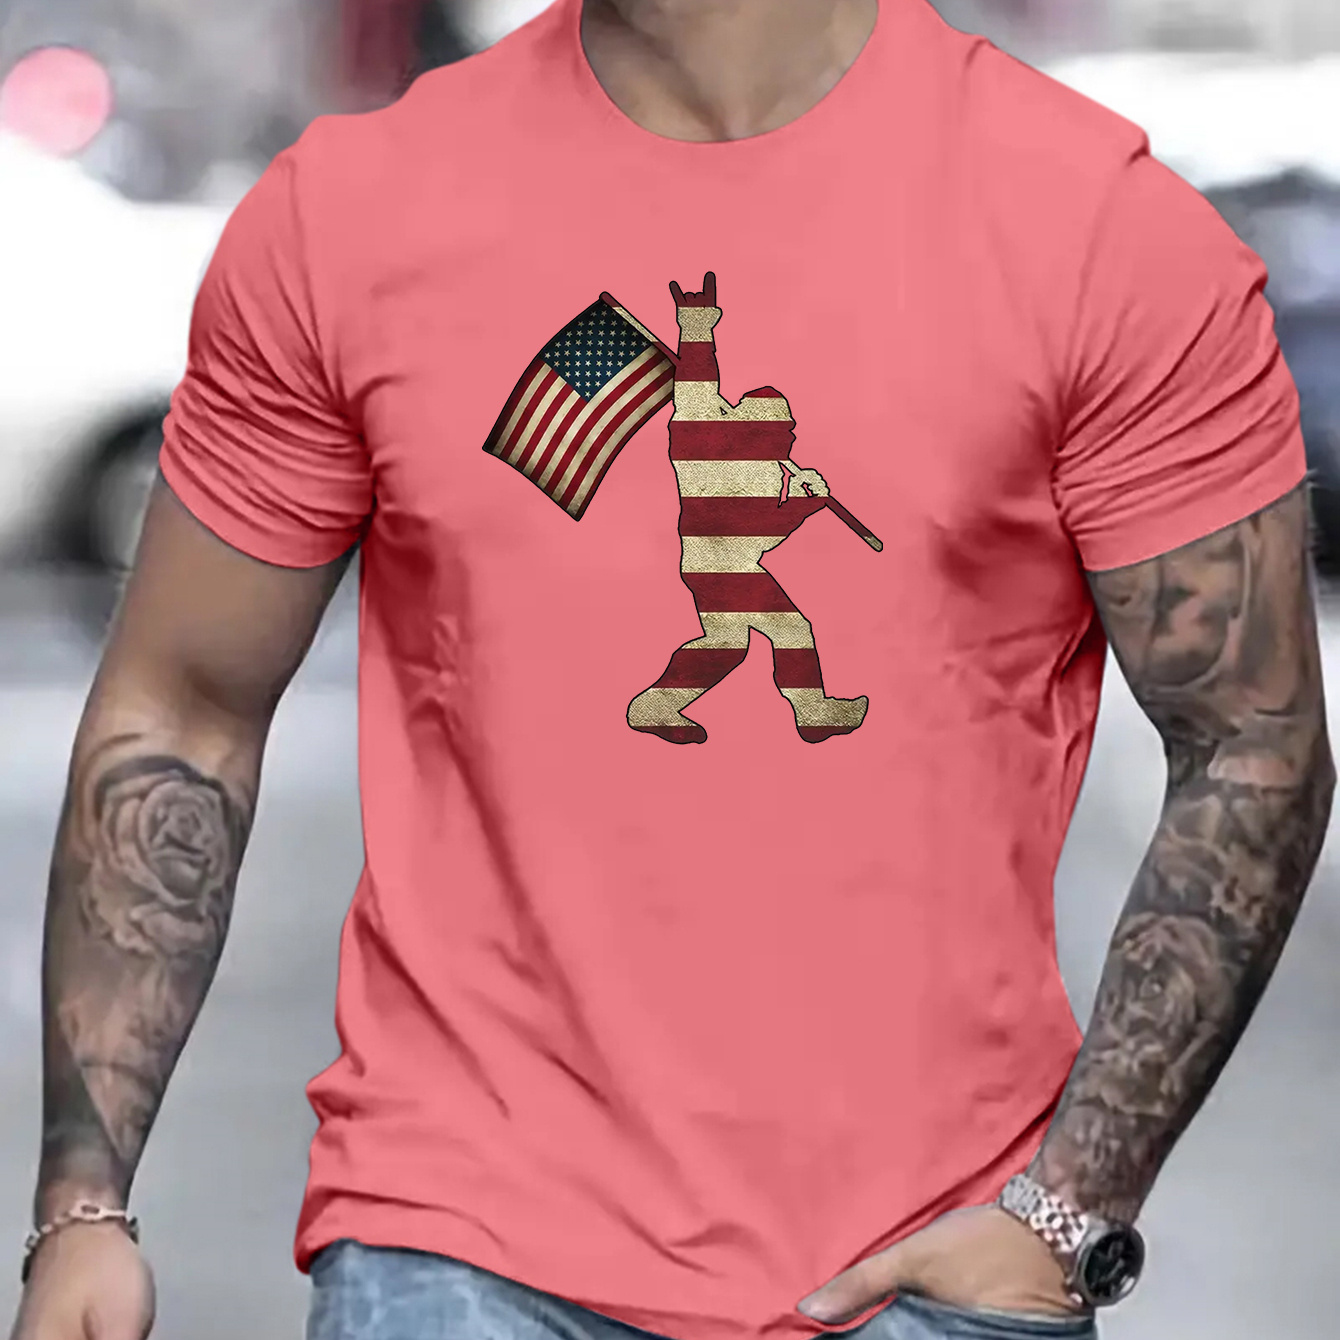 

Usa Flag Print Men's Trendy Street Style T-shirts, Casual Graphic Tee, Short Sleeve Round Neck Sports Tops, Men's Clothing For Outdoor Activities Summer